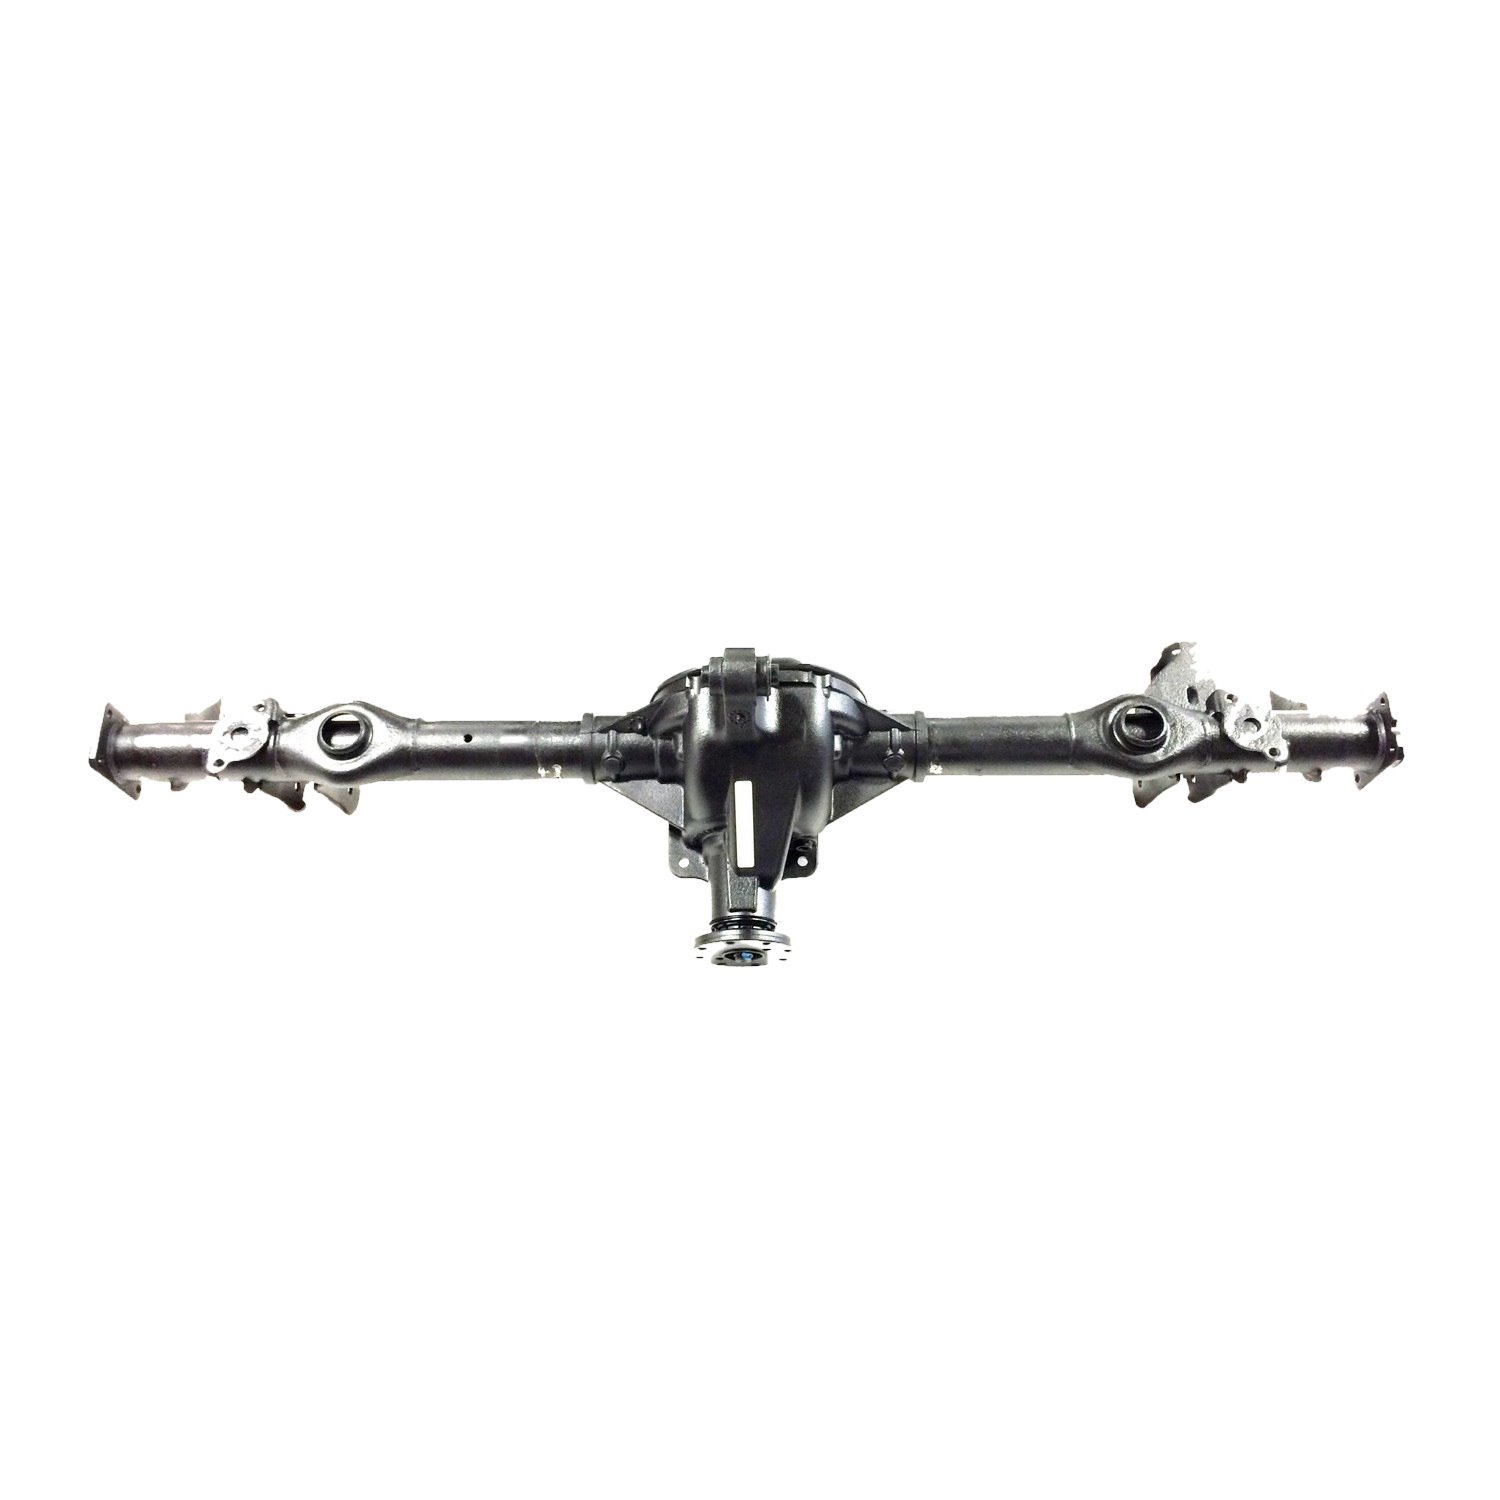 Remanufactured 9.75" Rear Differential Axle Assembly for Ford F150 Raptor with 4:11 Gear Ratio